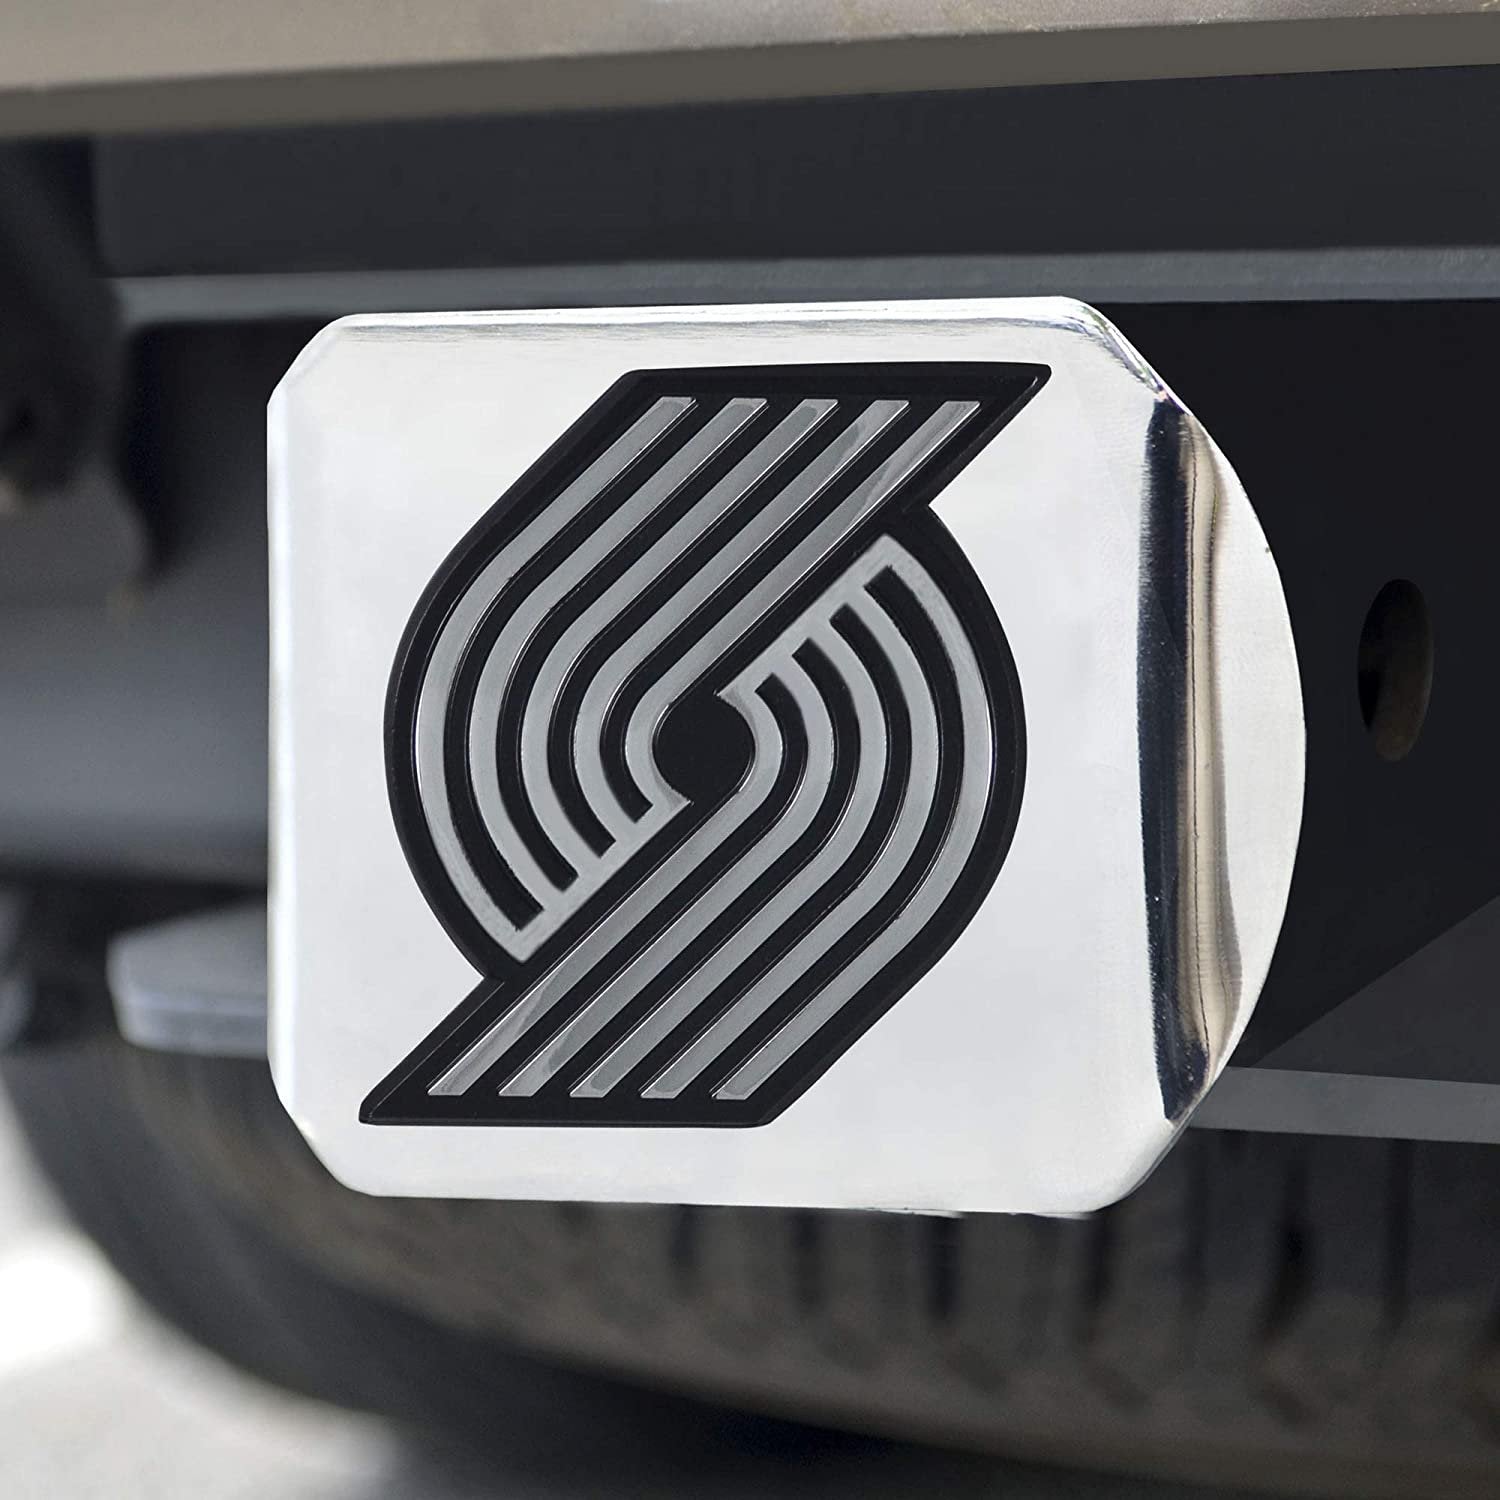 Portland Trail Blazers Hitch Cover Solid Metal with Raised Chrome Metal Emblem 2" Square Type III